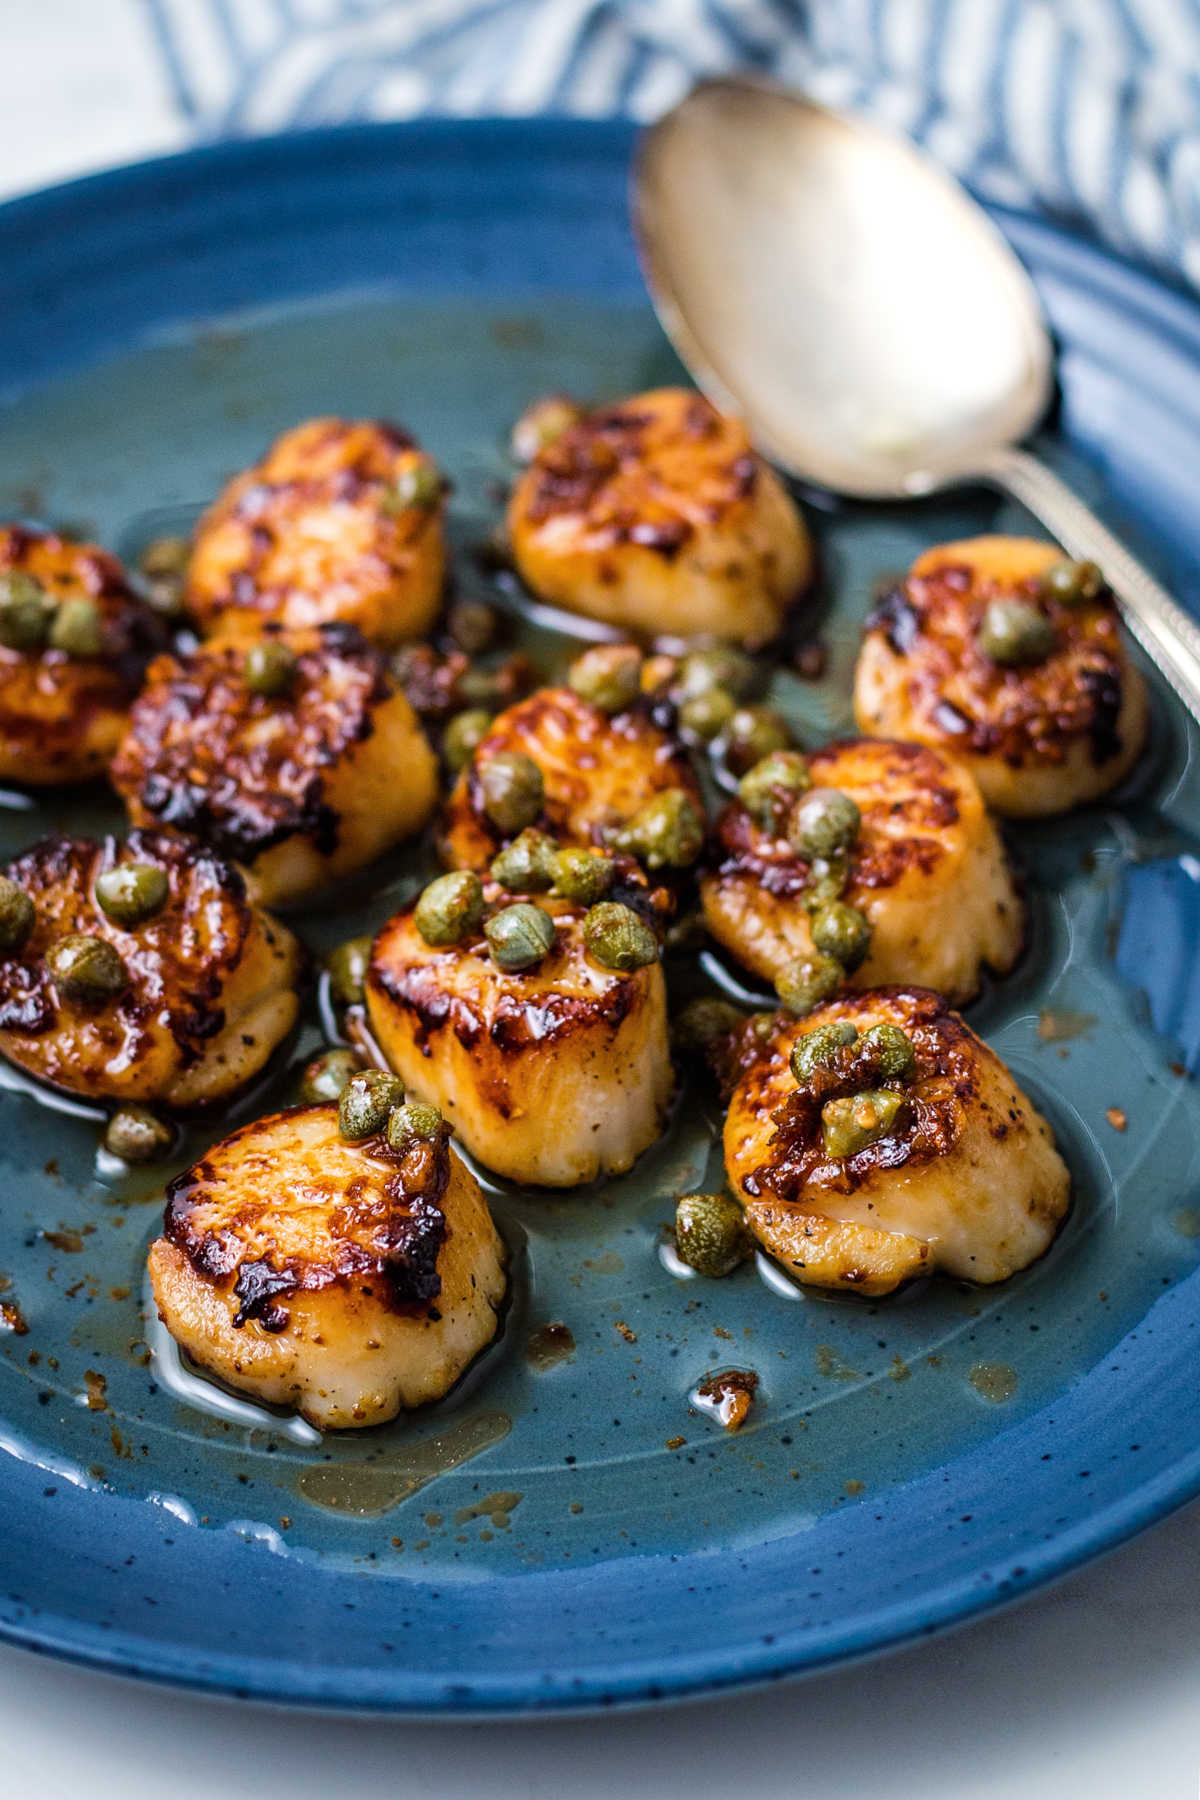 seared scallops with brown butter sauce on a blue plate with capers.